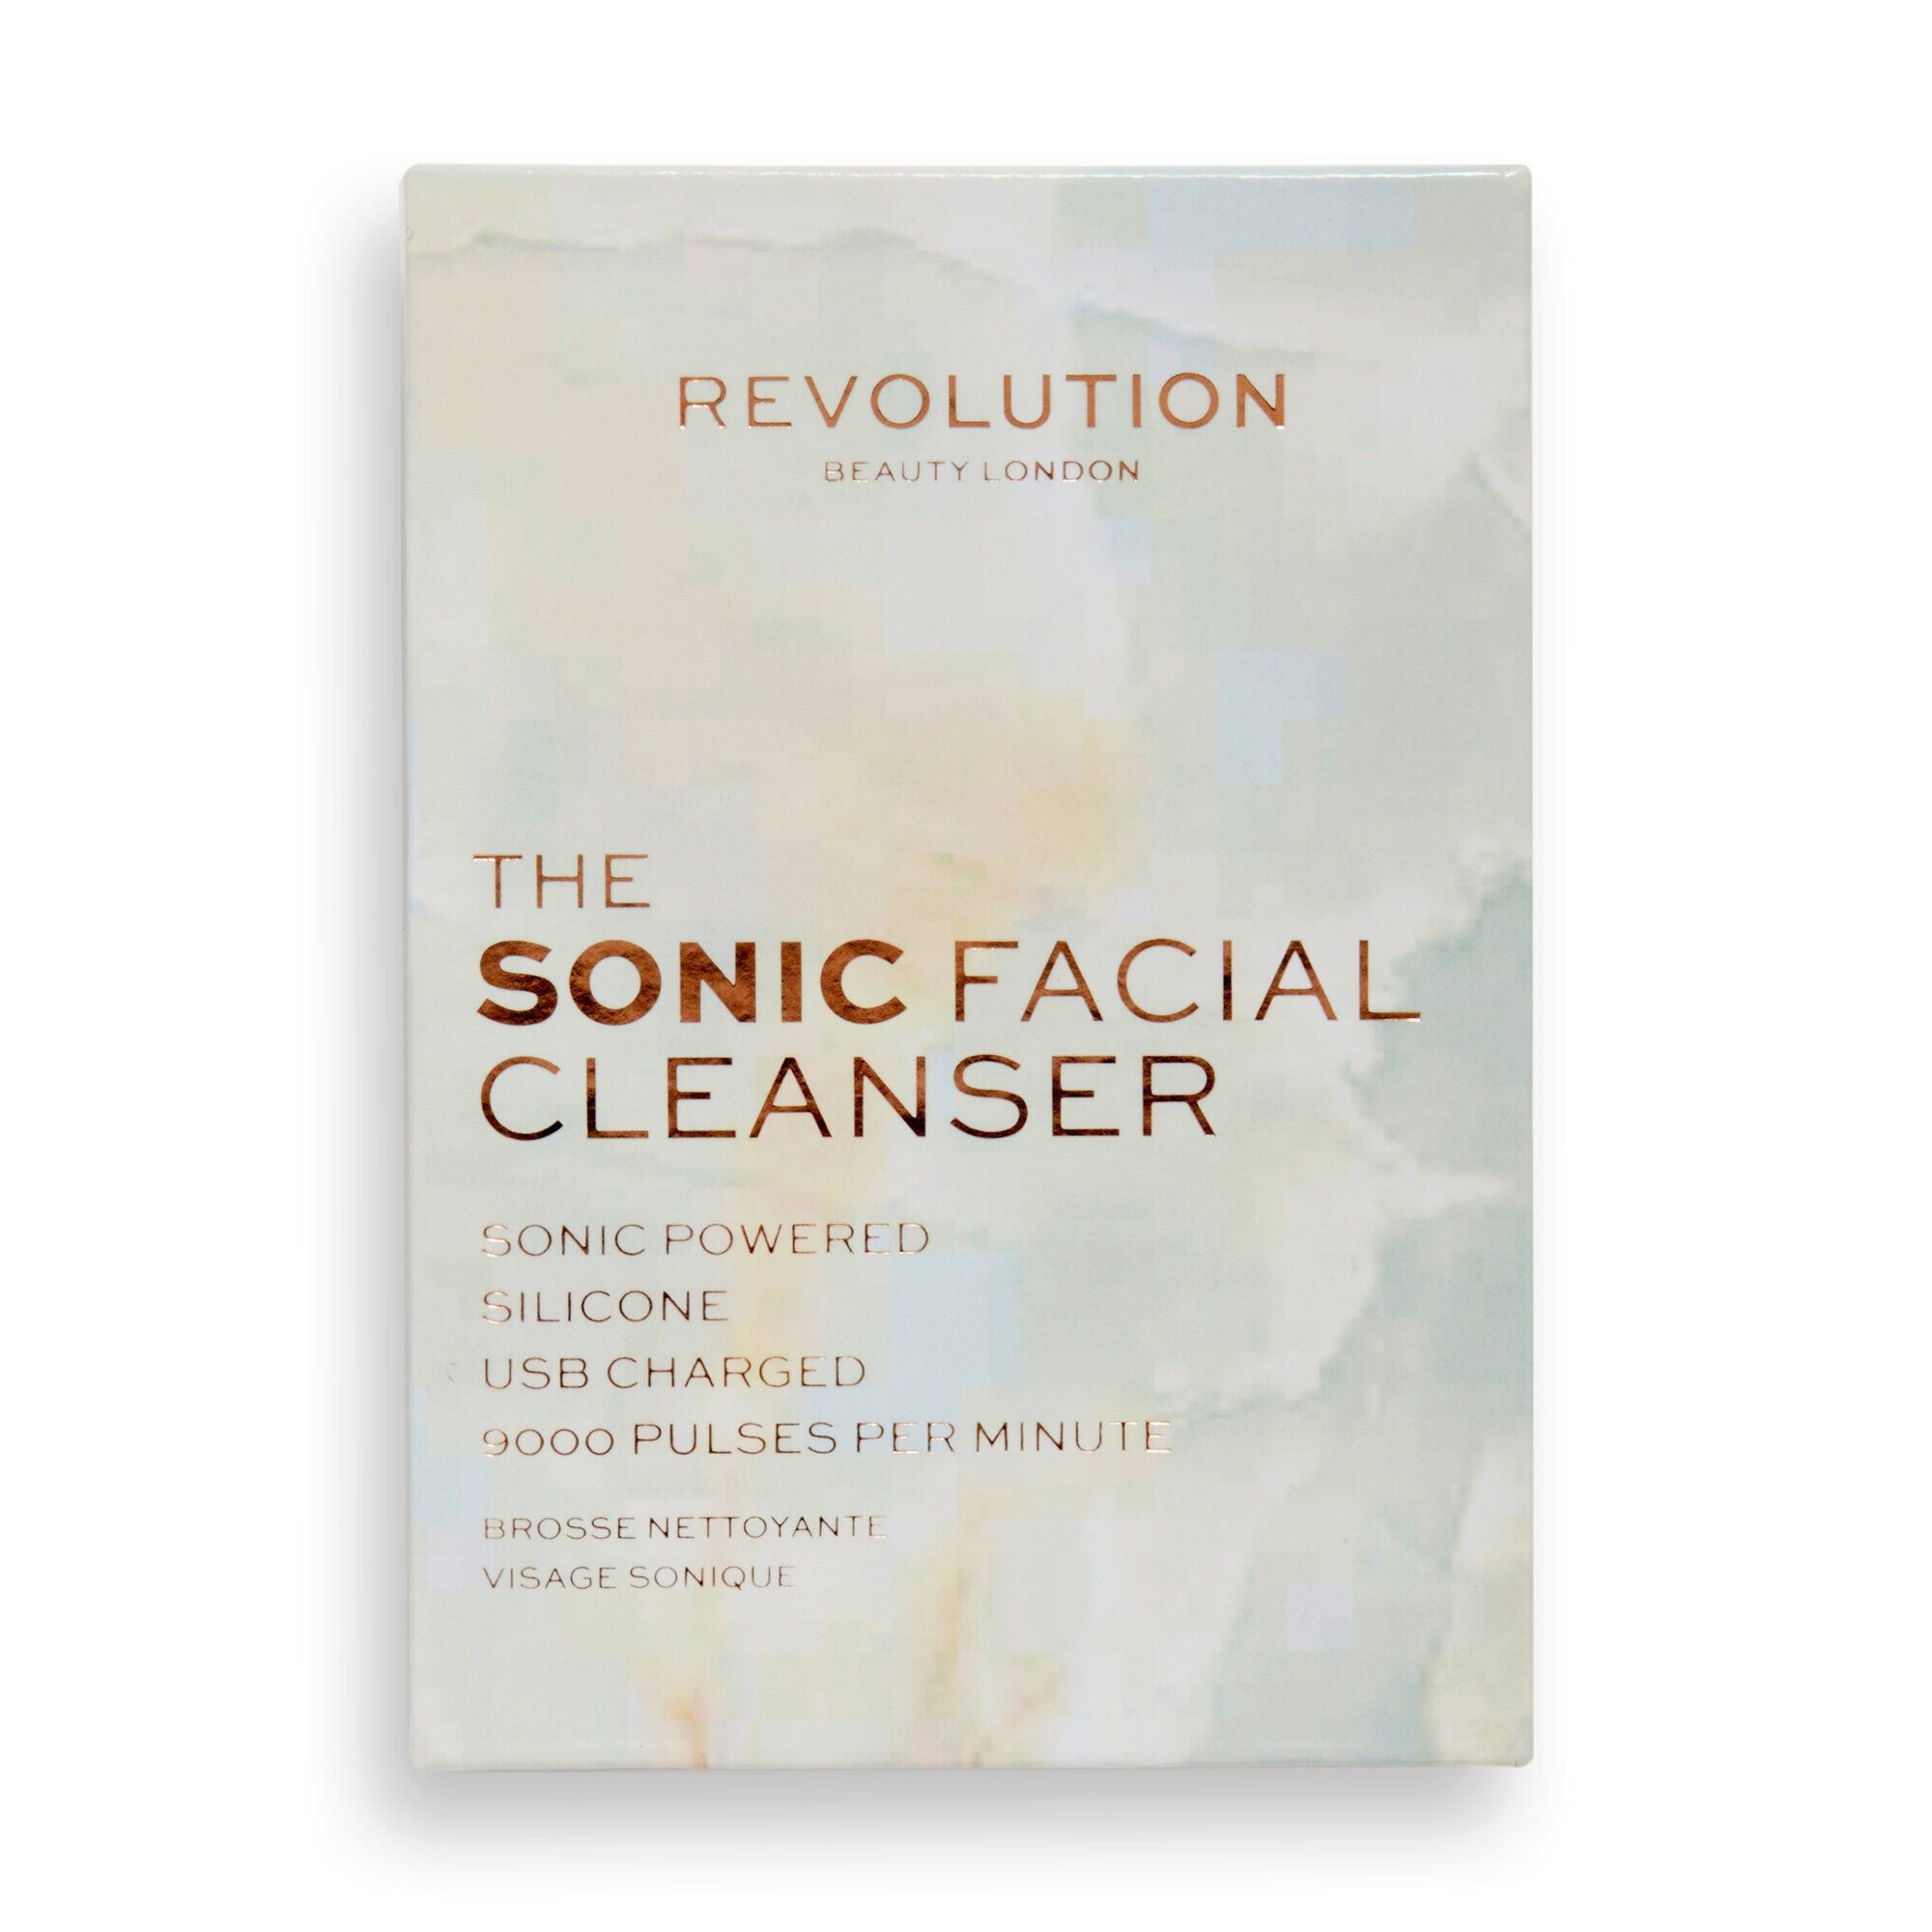 The Sonic Facial Cleanser